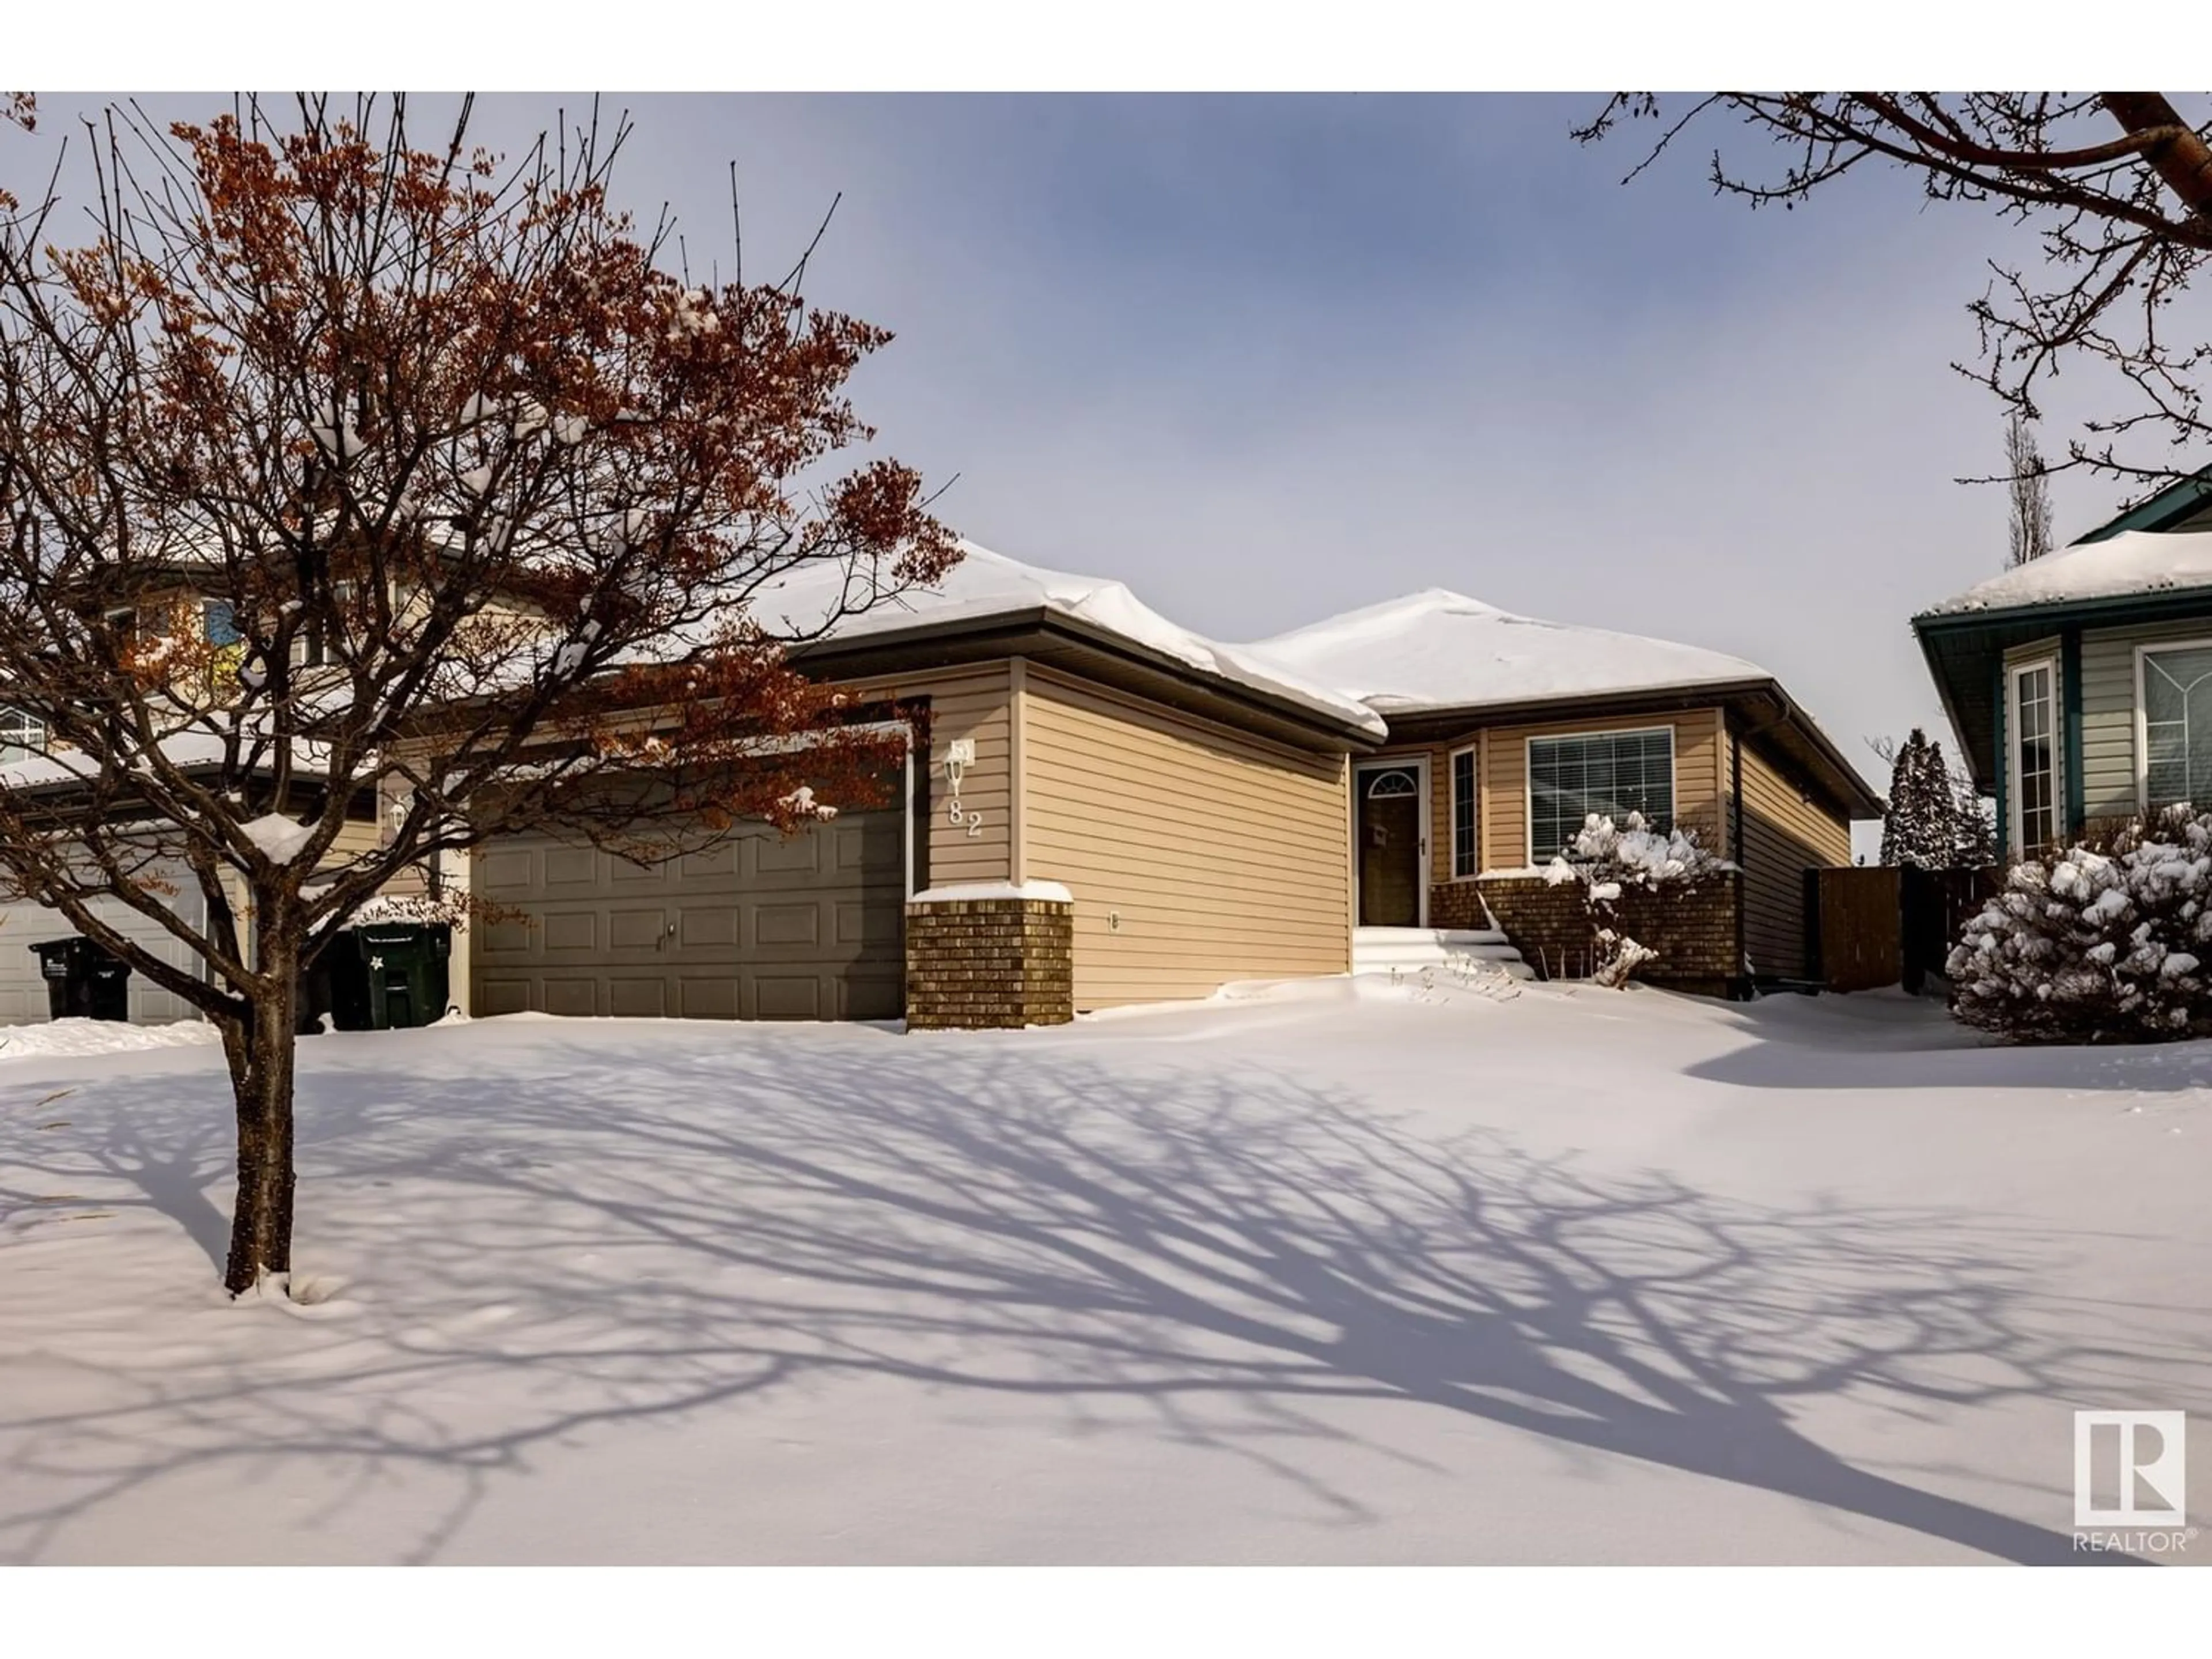 Home with vinyl exterior material for 82 ORCHID CR, Sherwood Park Alberta T8H2E3